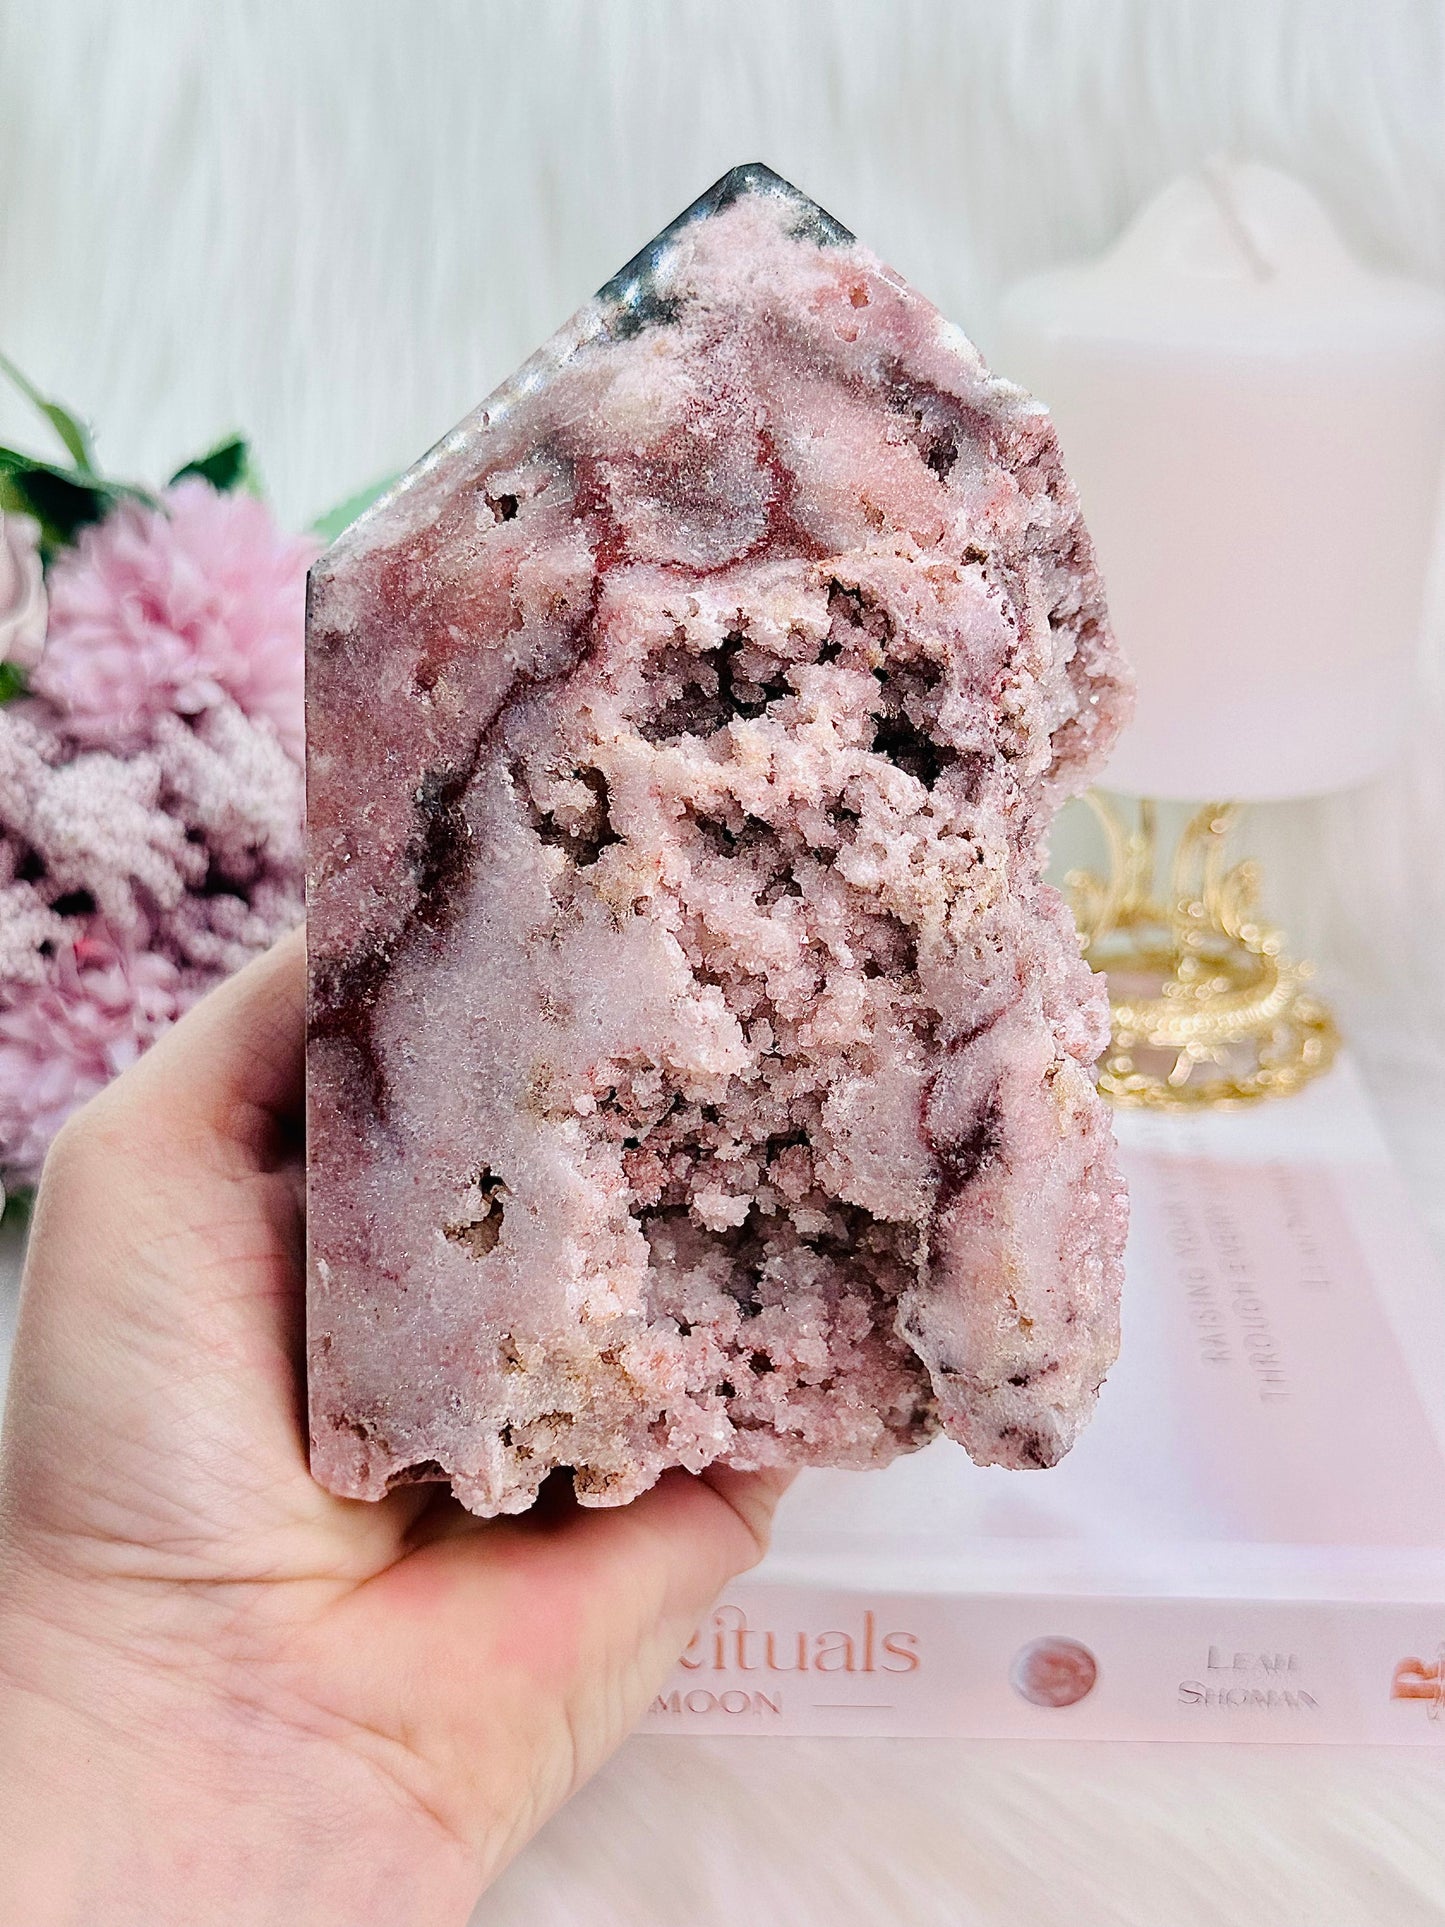 The Ultimate Beauty!!! Divine Large 1.16KG Druzy Pink Amethyst Freeform From Uruguay